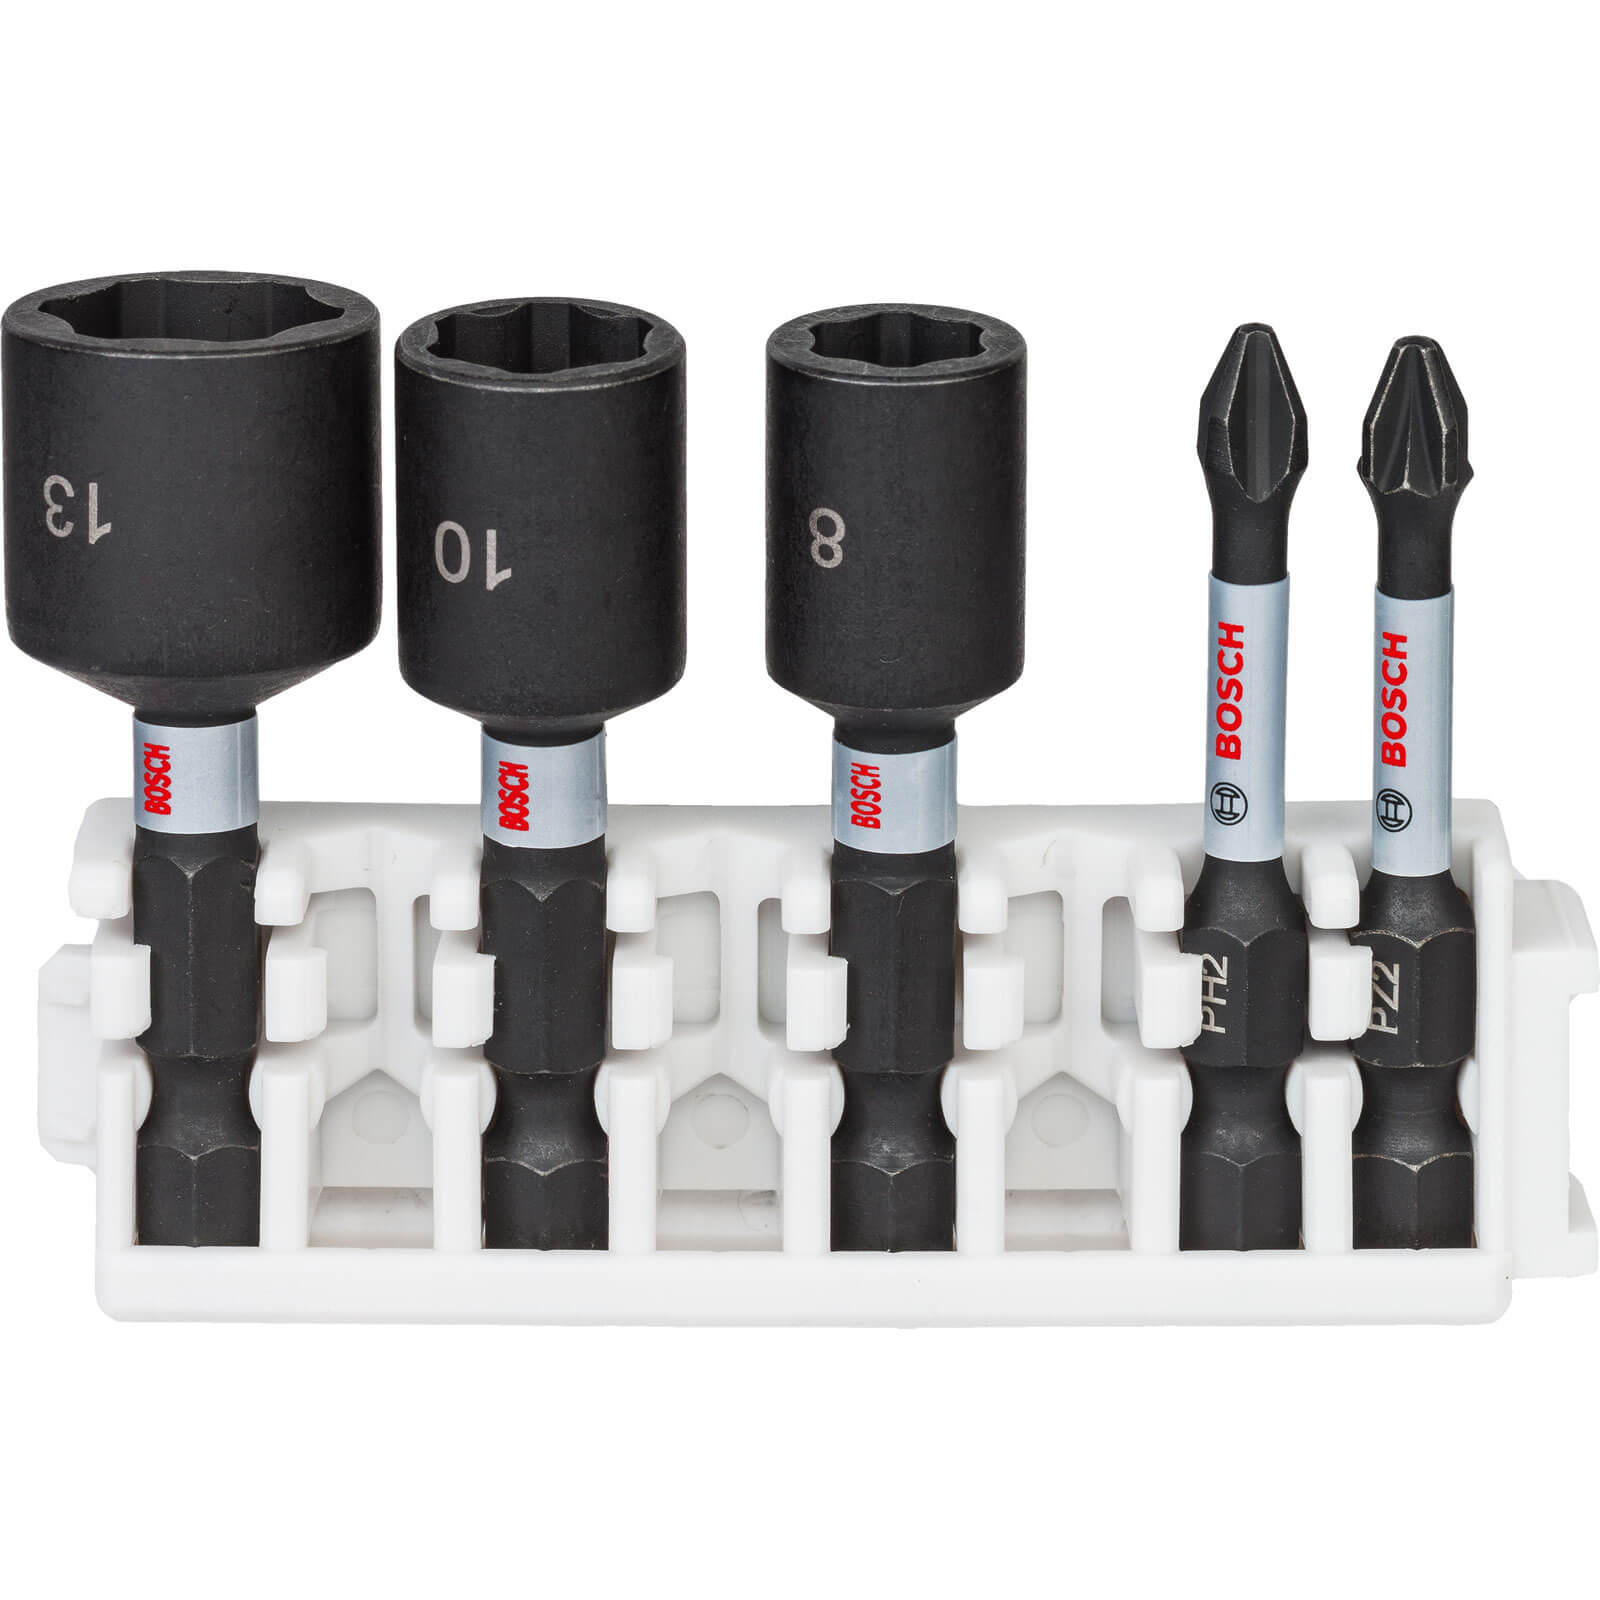 Photo of Bosch Impact Control Nutsetter And Impact Power Bit Set